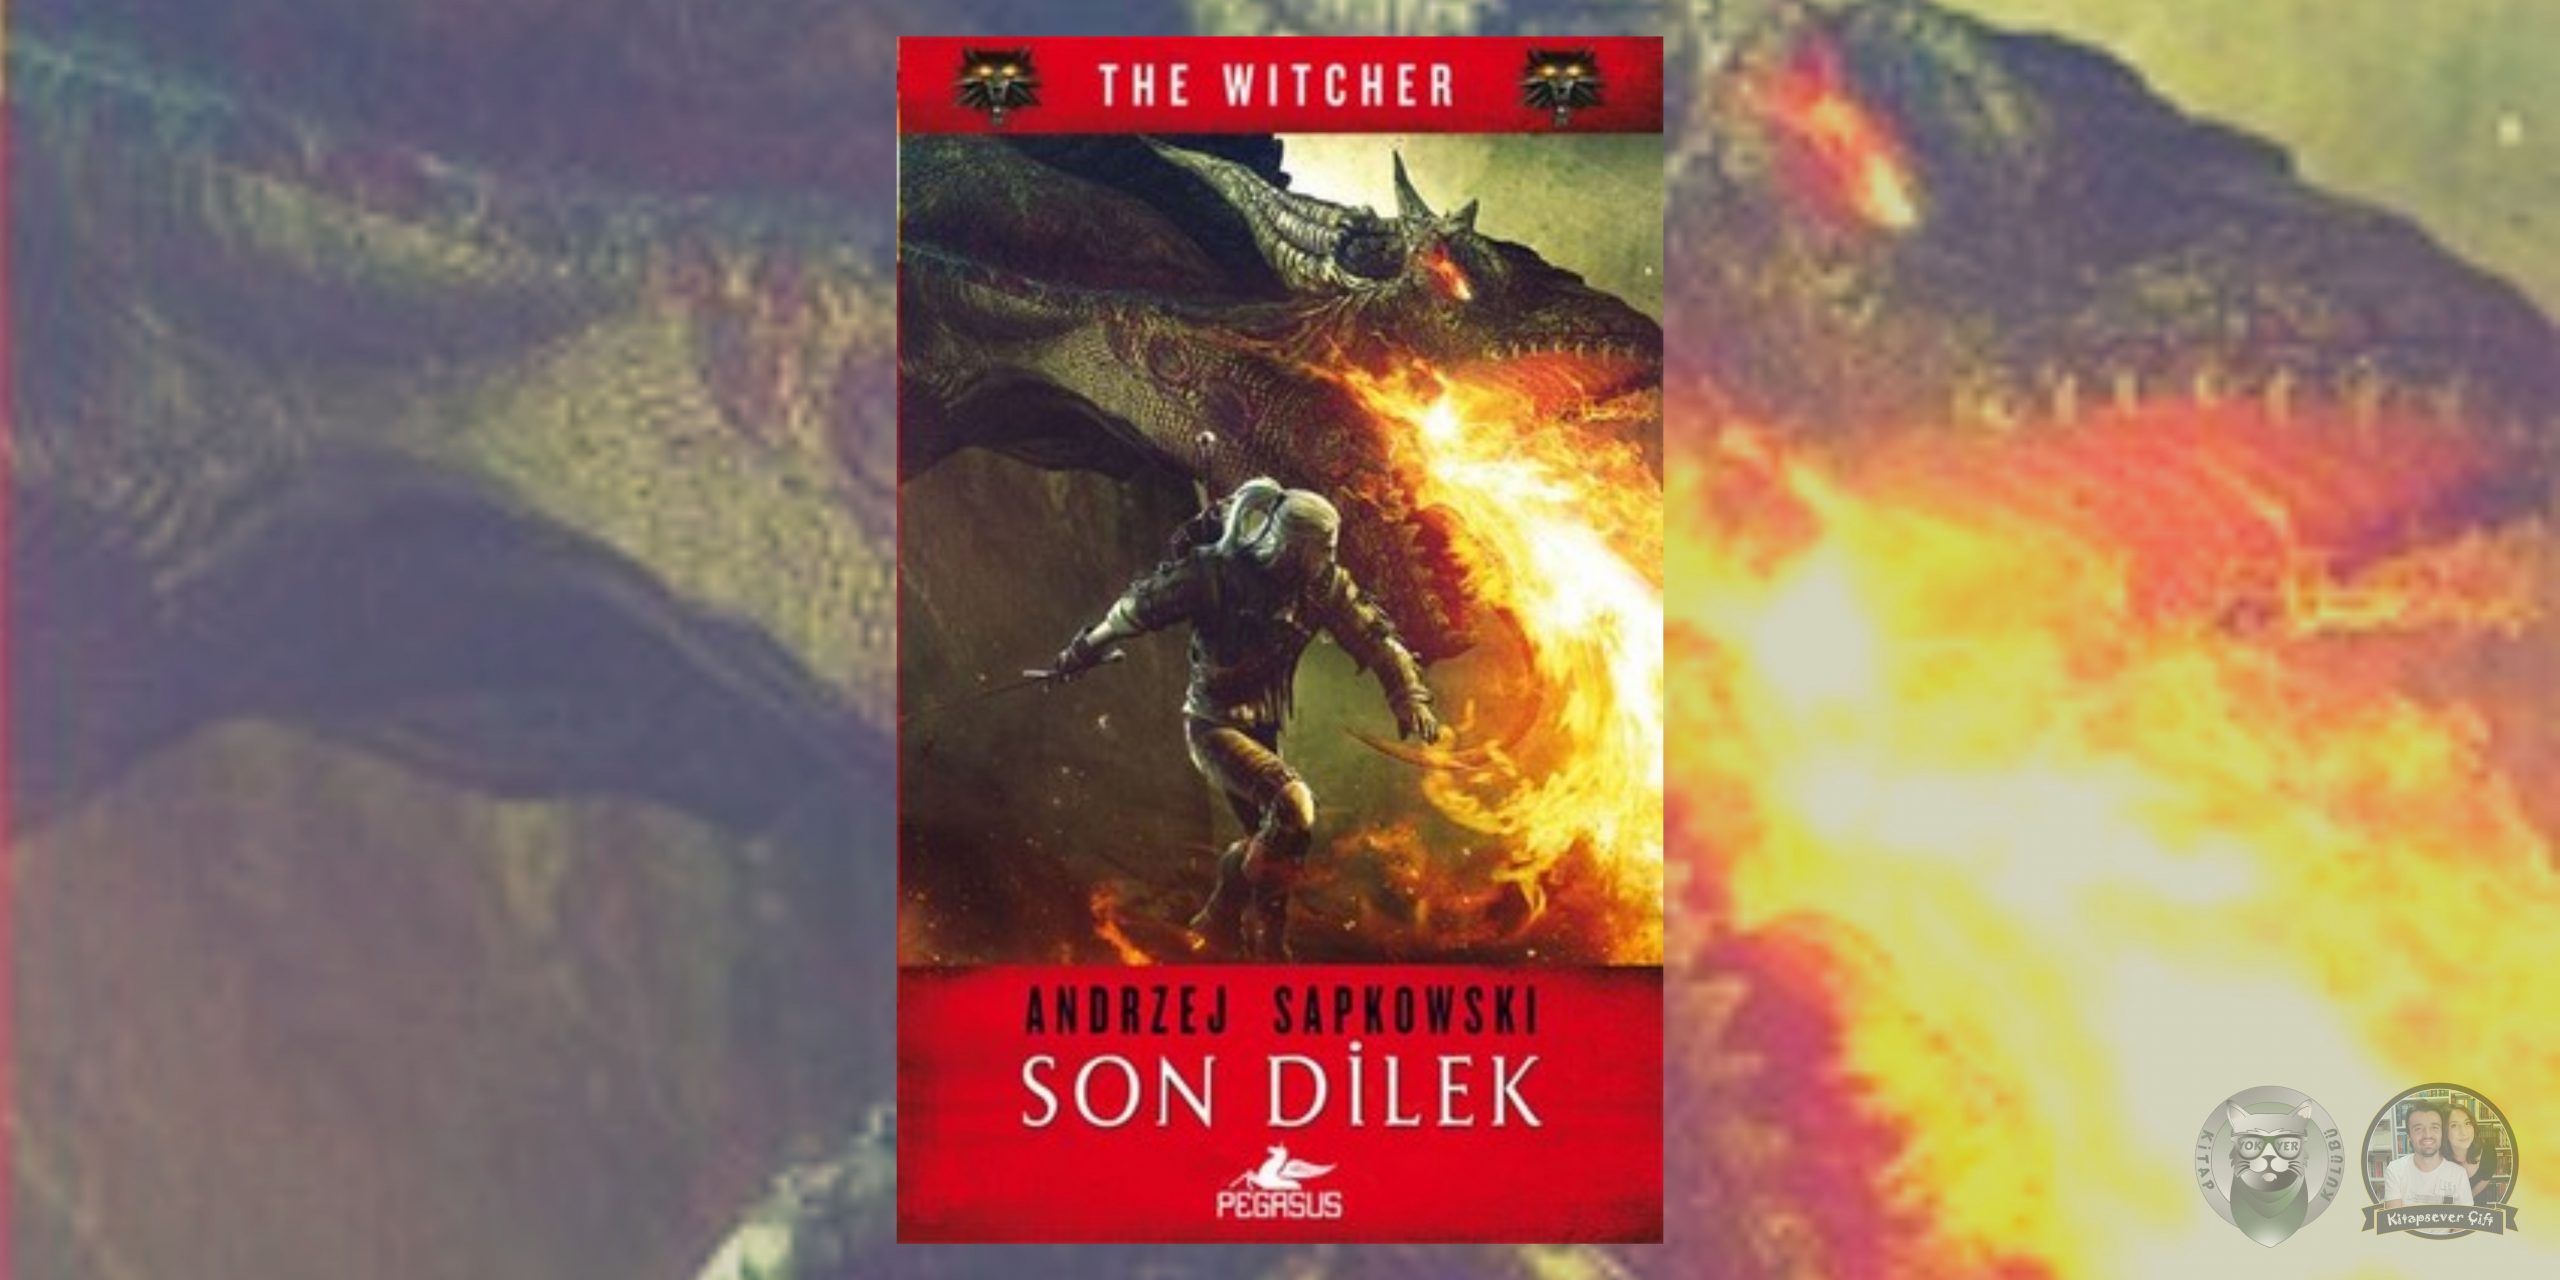 the witcher - son dilek